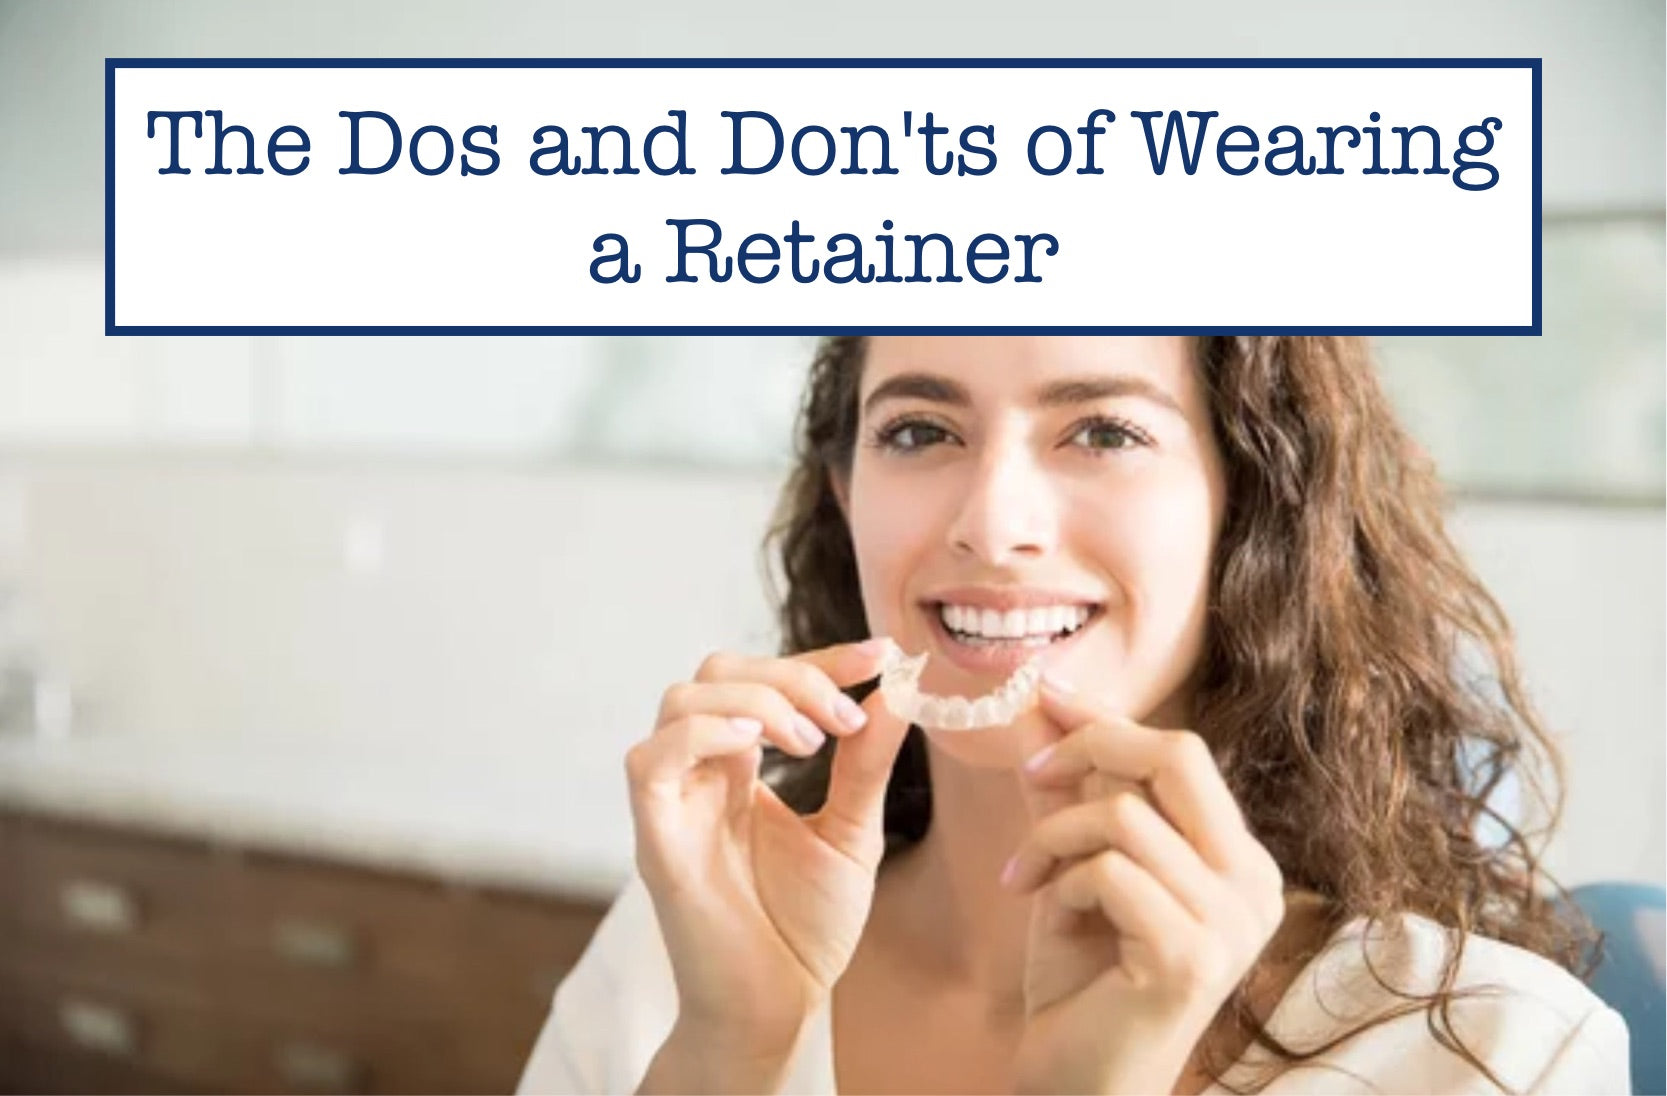 The Dos and Don'ts of Wearing a Retainer